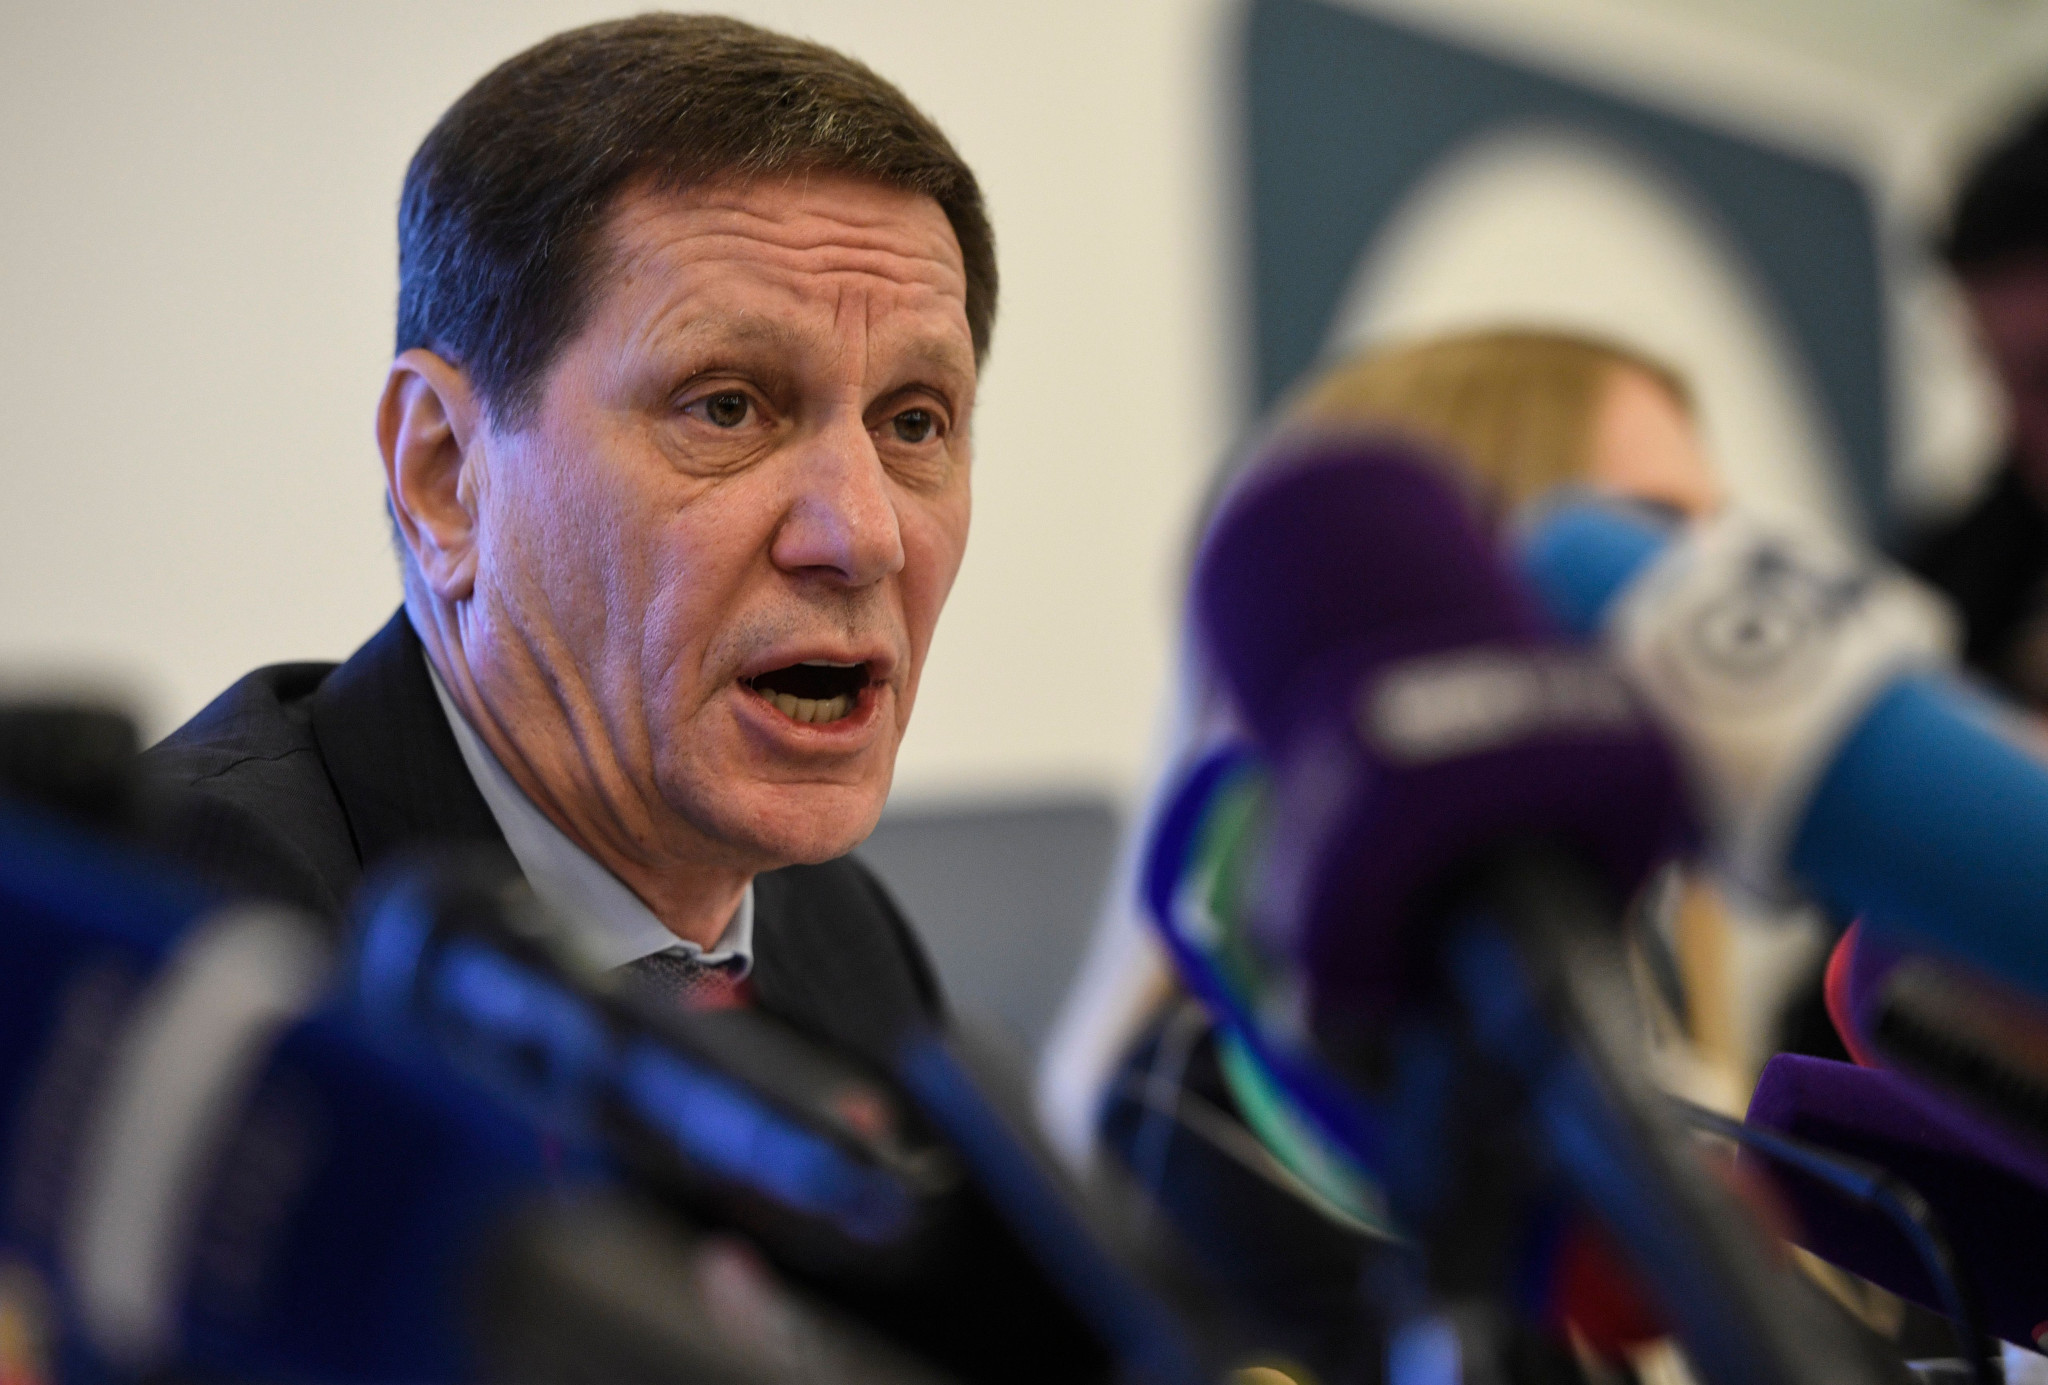 Alexander Zhukov has confirmed the Russian Olympic Committee suspension has been lifted ©Getty Images